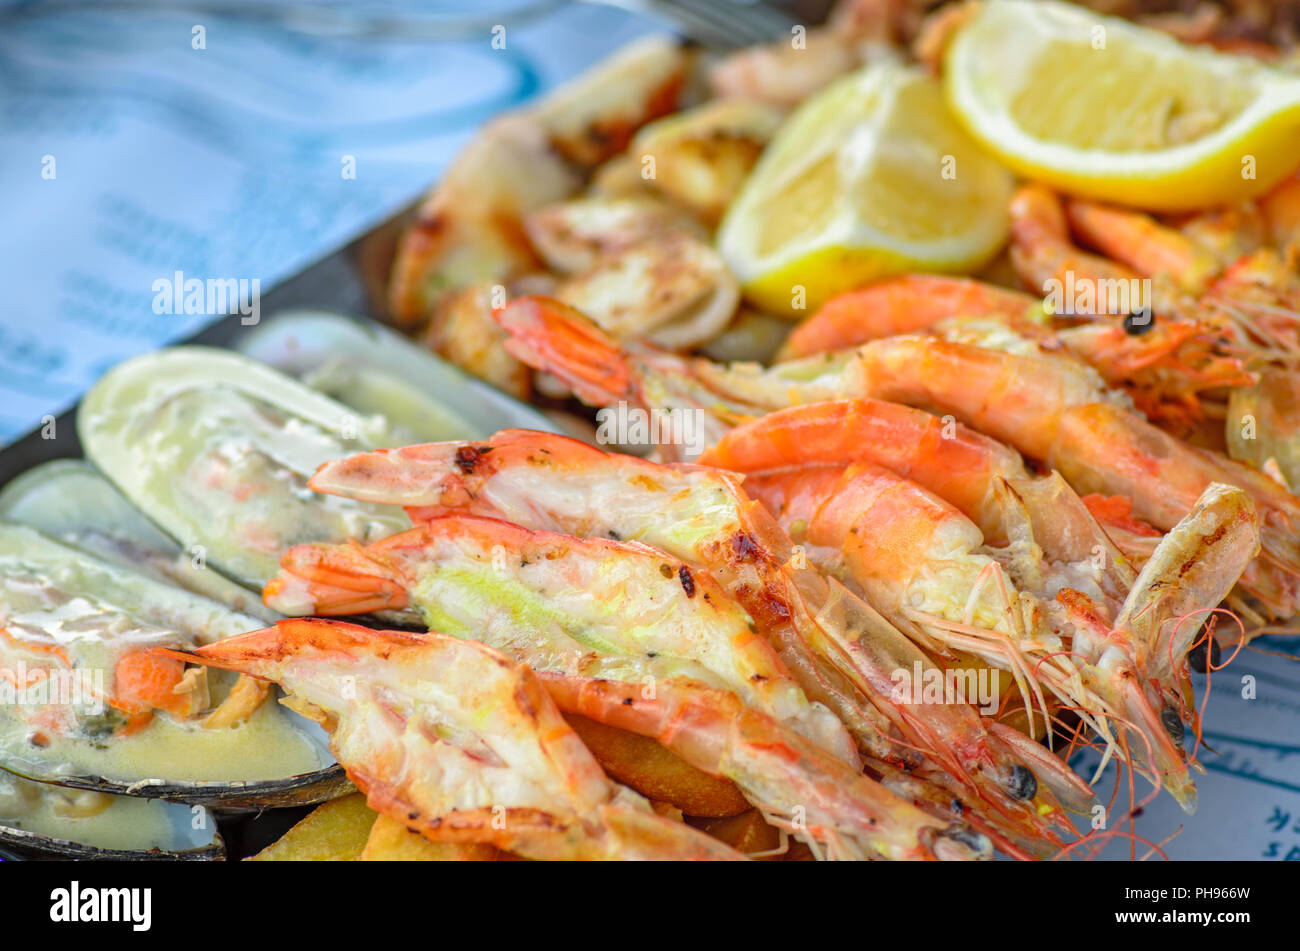 Grilled shrimps and mussels Stock Photo